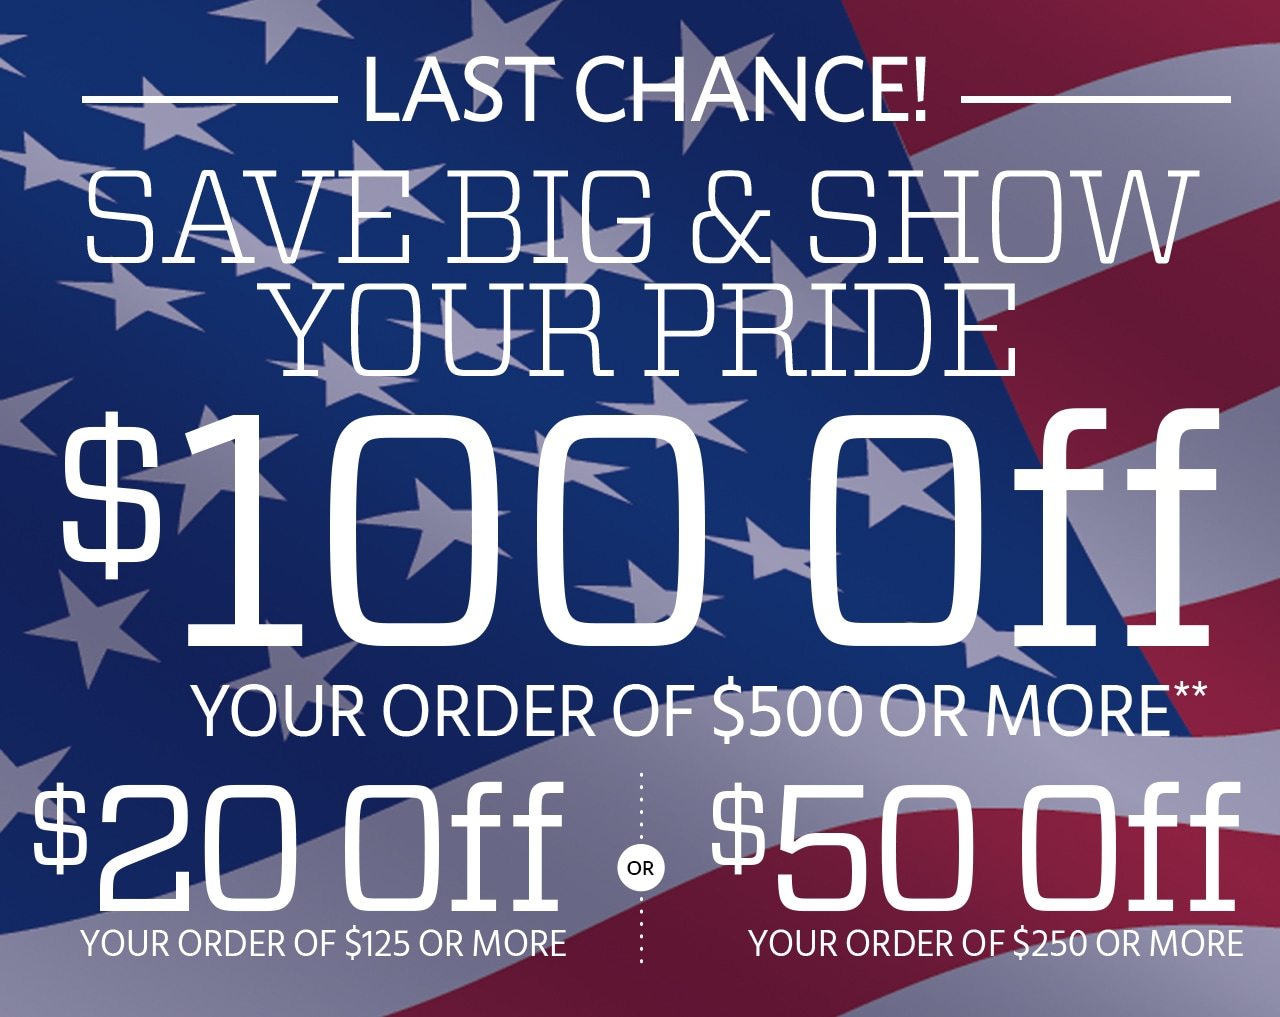 LAST CHANCE! SAVE BIG & SHOW YOUR PRIDE. Take $100 Off Your Purchase of $500 or More or Take $50 Off Your Purchase of $250 or More or Take $20 Off Your Purchase of $125 or More